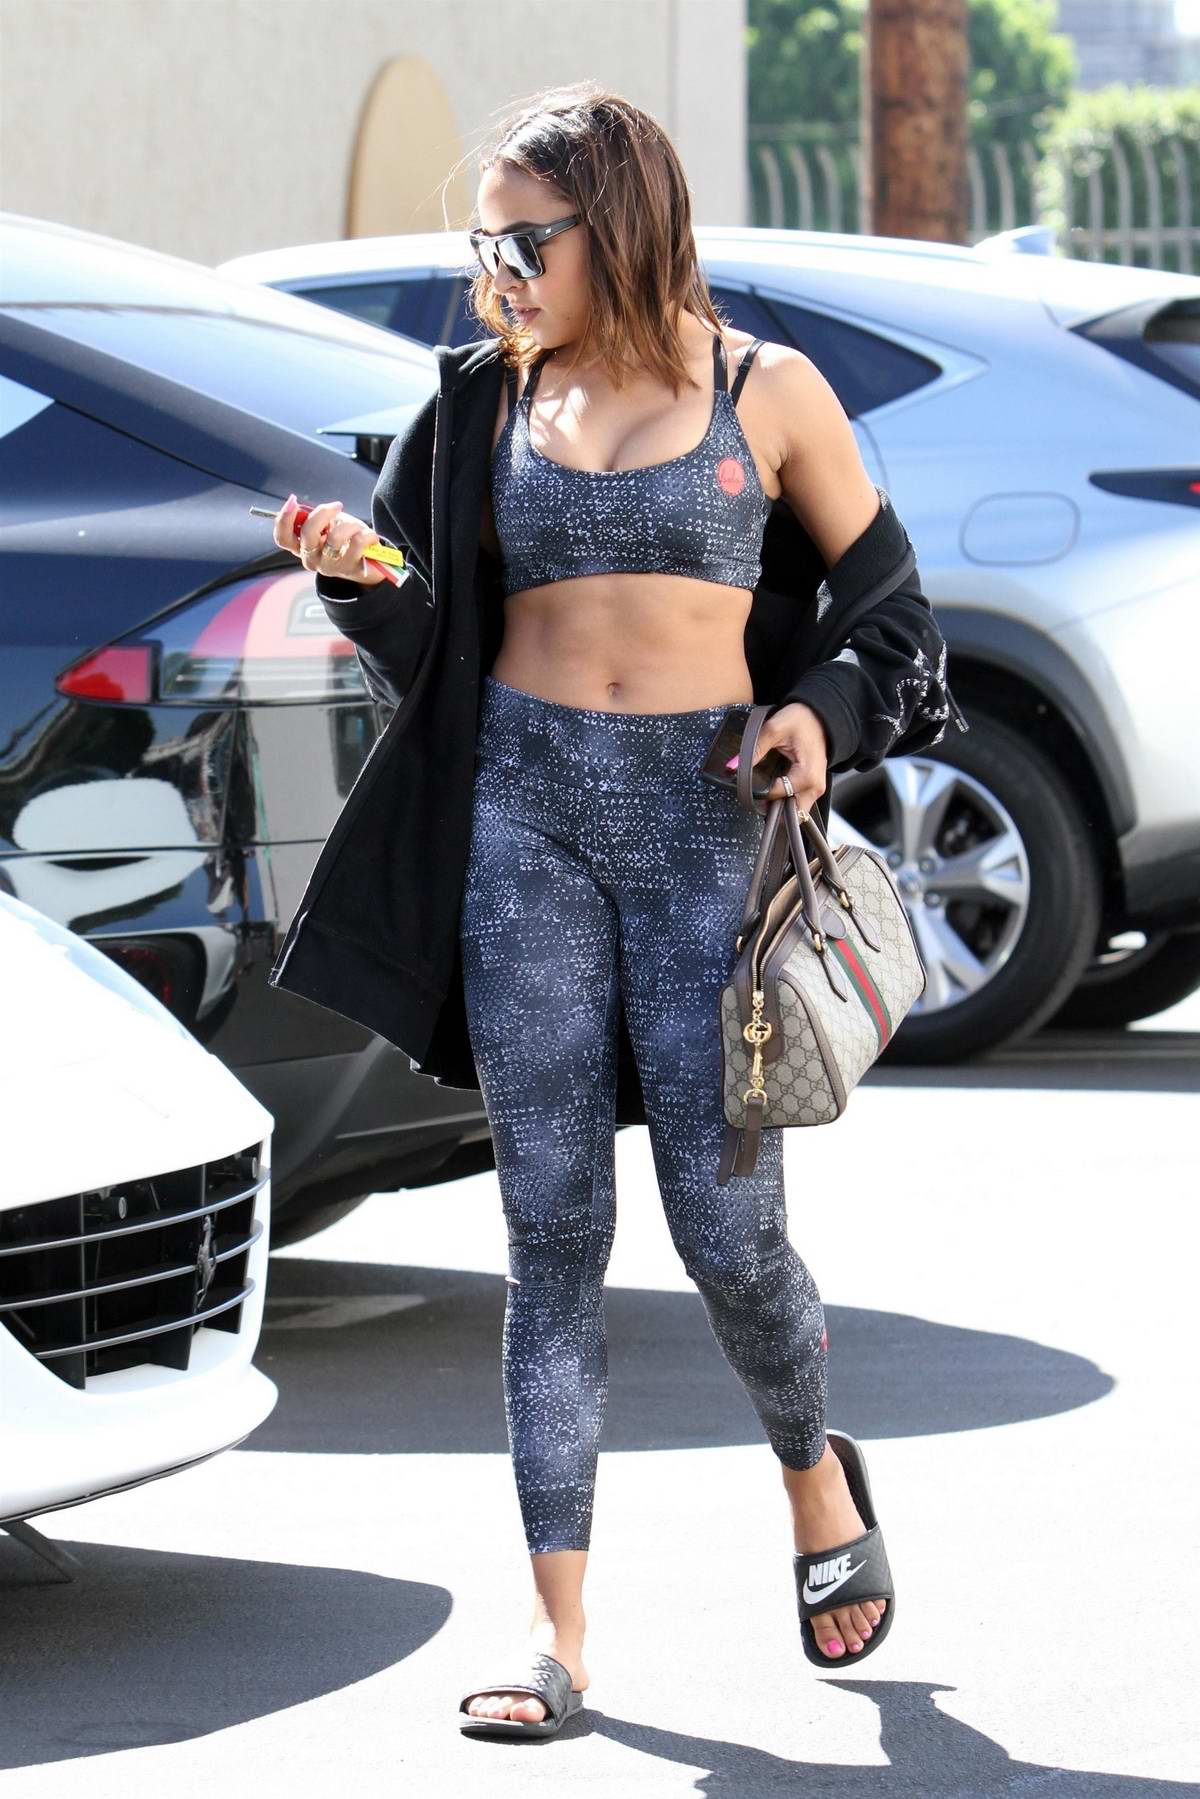 https://www.celebsfirst.com/wp-content/uploads/2018/09/tinashe-rocks-a-patterned-leggings-with-matching-sports-bra-as-she-arrives-at-the-dwts-rehearsal-studio-in-los-angeles-180918_2.jpg